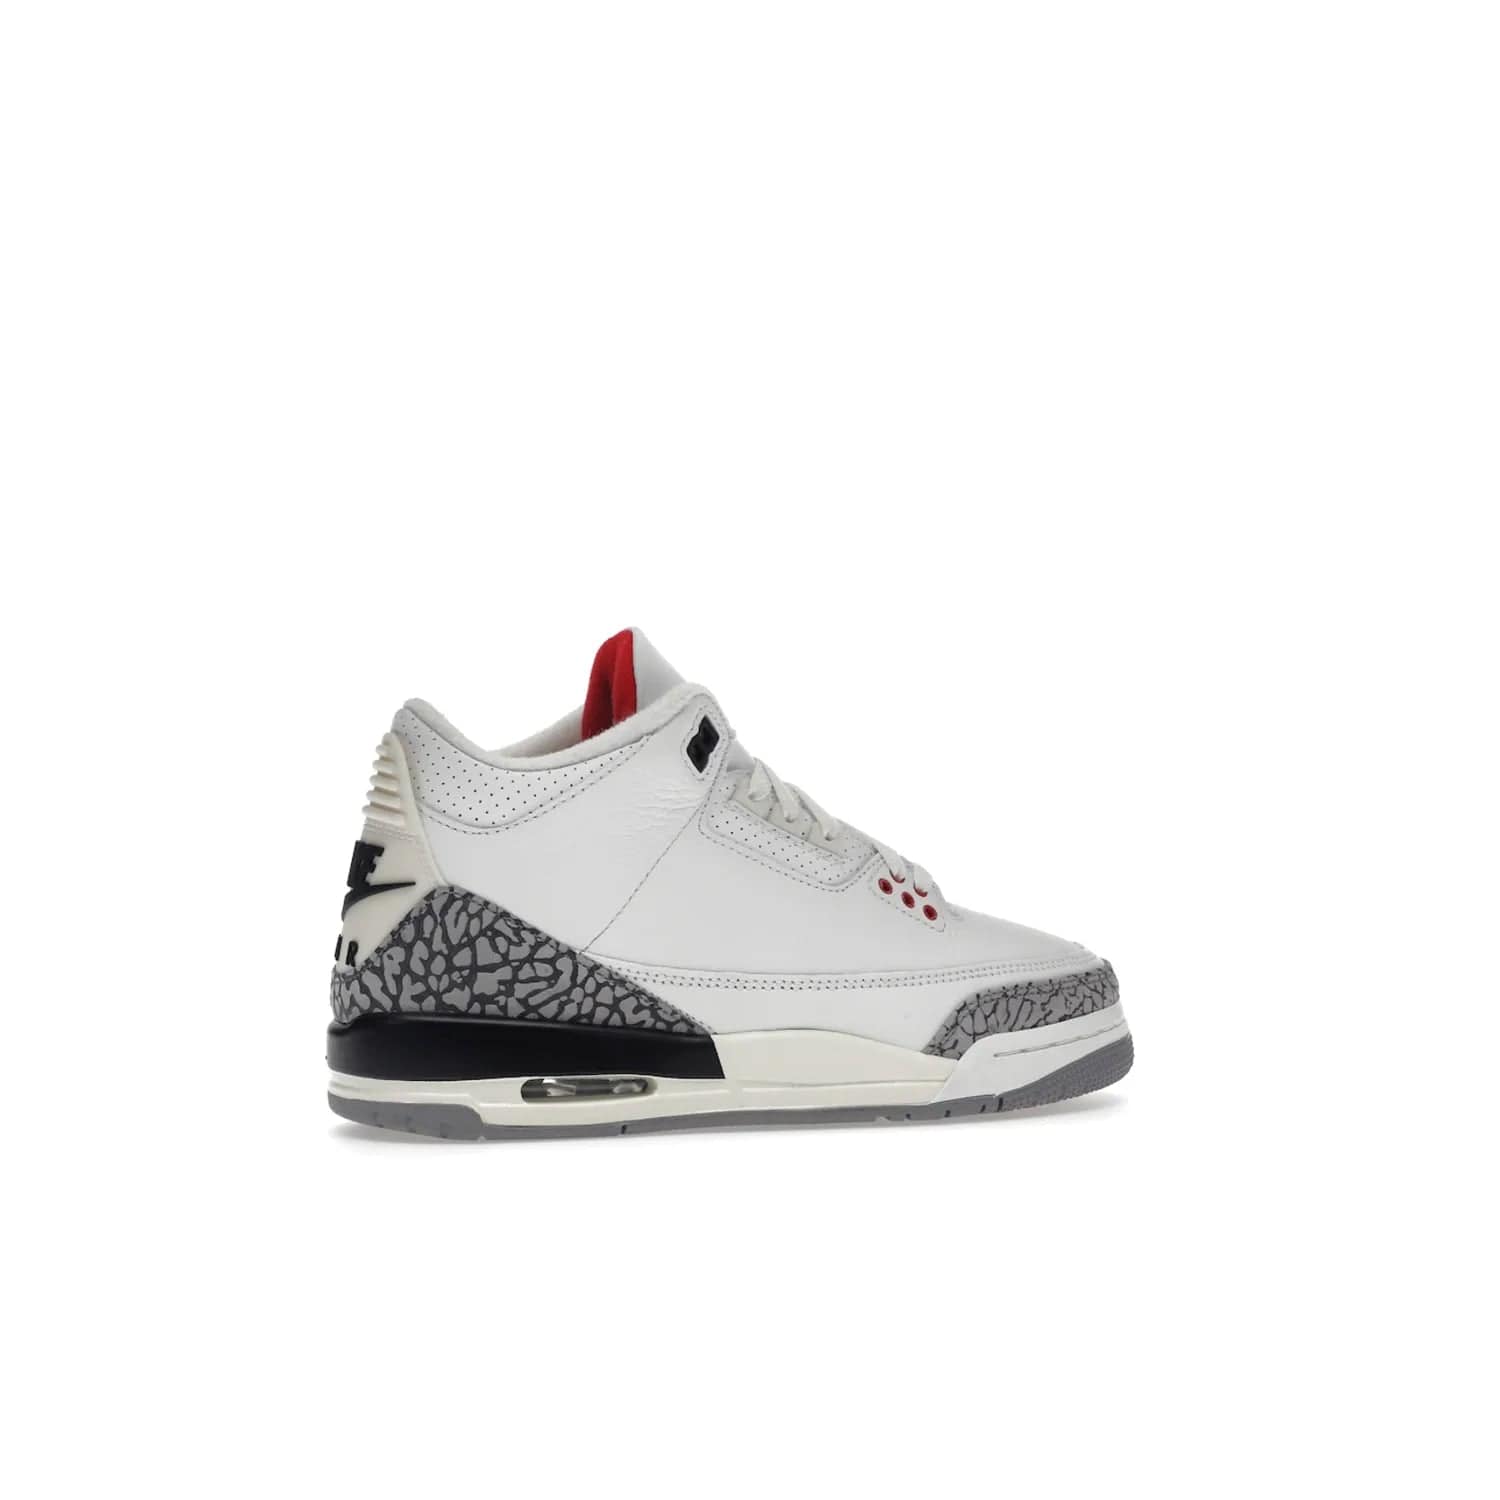 Jordan 3 Retro White Cement Reimagined (GS) - Image 35 - Only at www.BallersClubKickz.com - Grab the perfect blend of modern design and classic style with the Jordan 3 Retro White Cement Reimagined (GS). Features Summit White, Fire Red, Black, and Cement Grey colorway, iconic Jordan logo embroidered on the tongue, and “Nike Air” branding. Limited availability, get your pair before March 11th 2023.